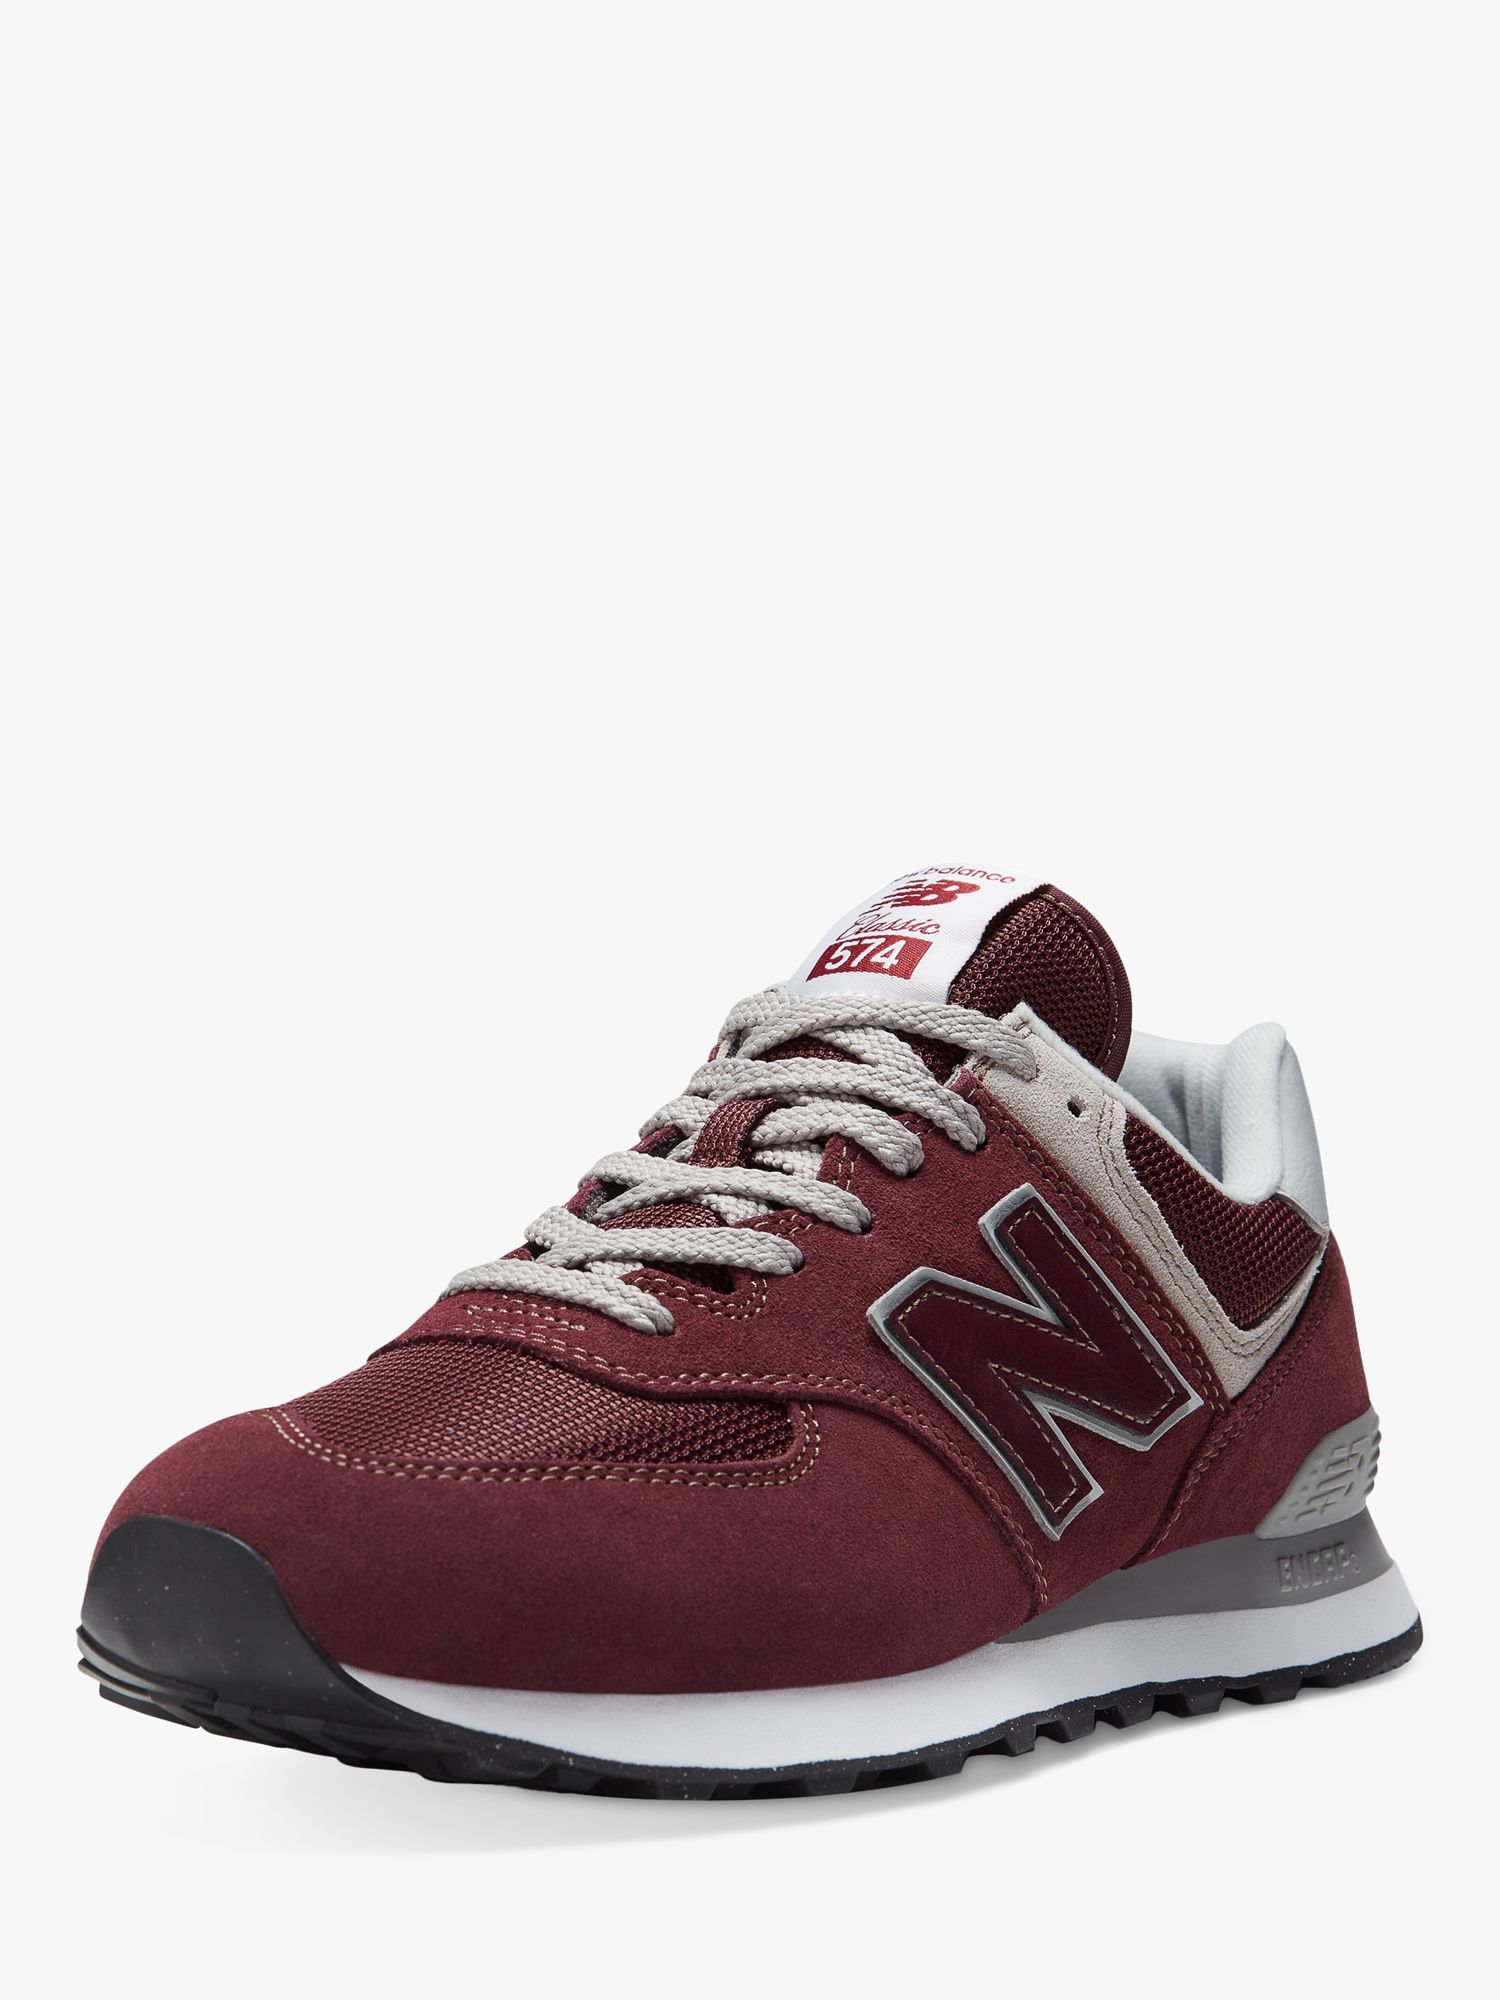 New Balance 574 Red Backpack